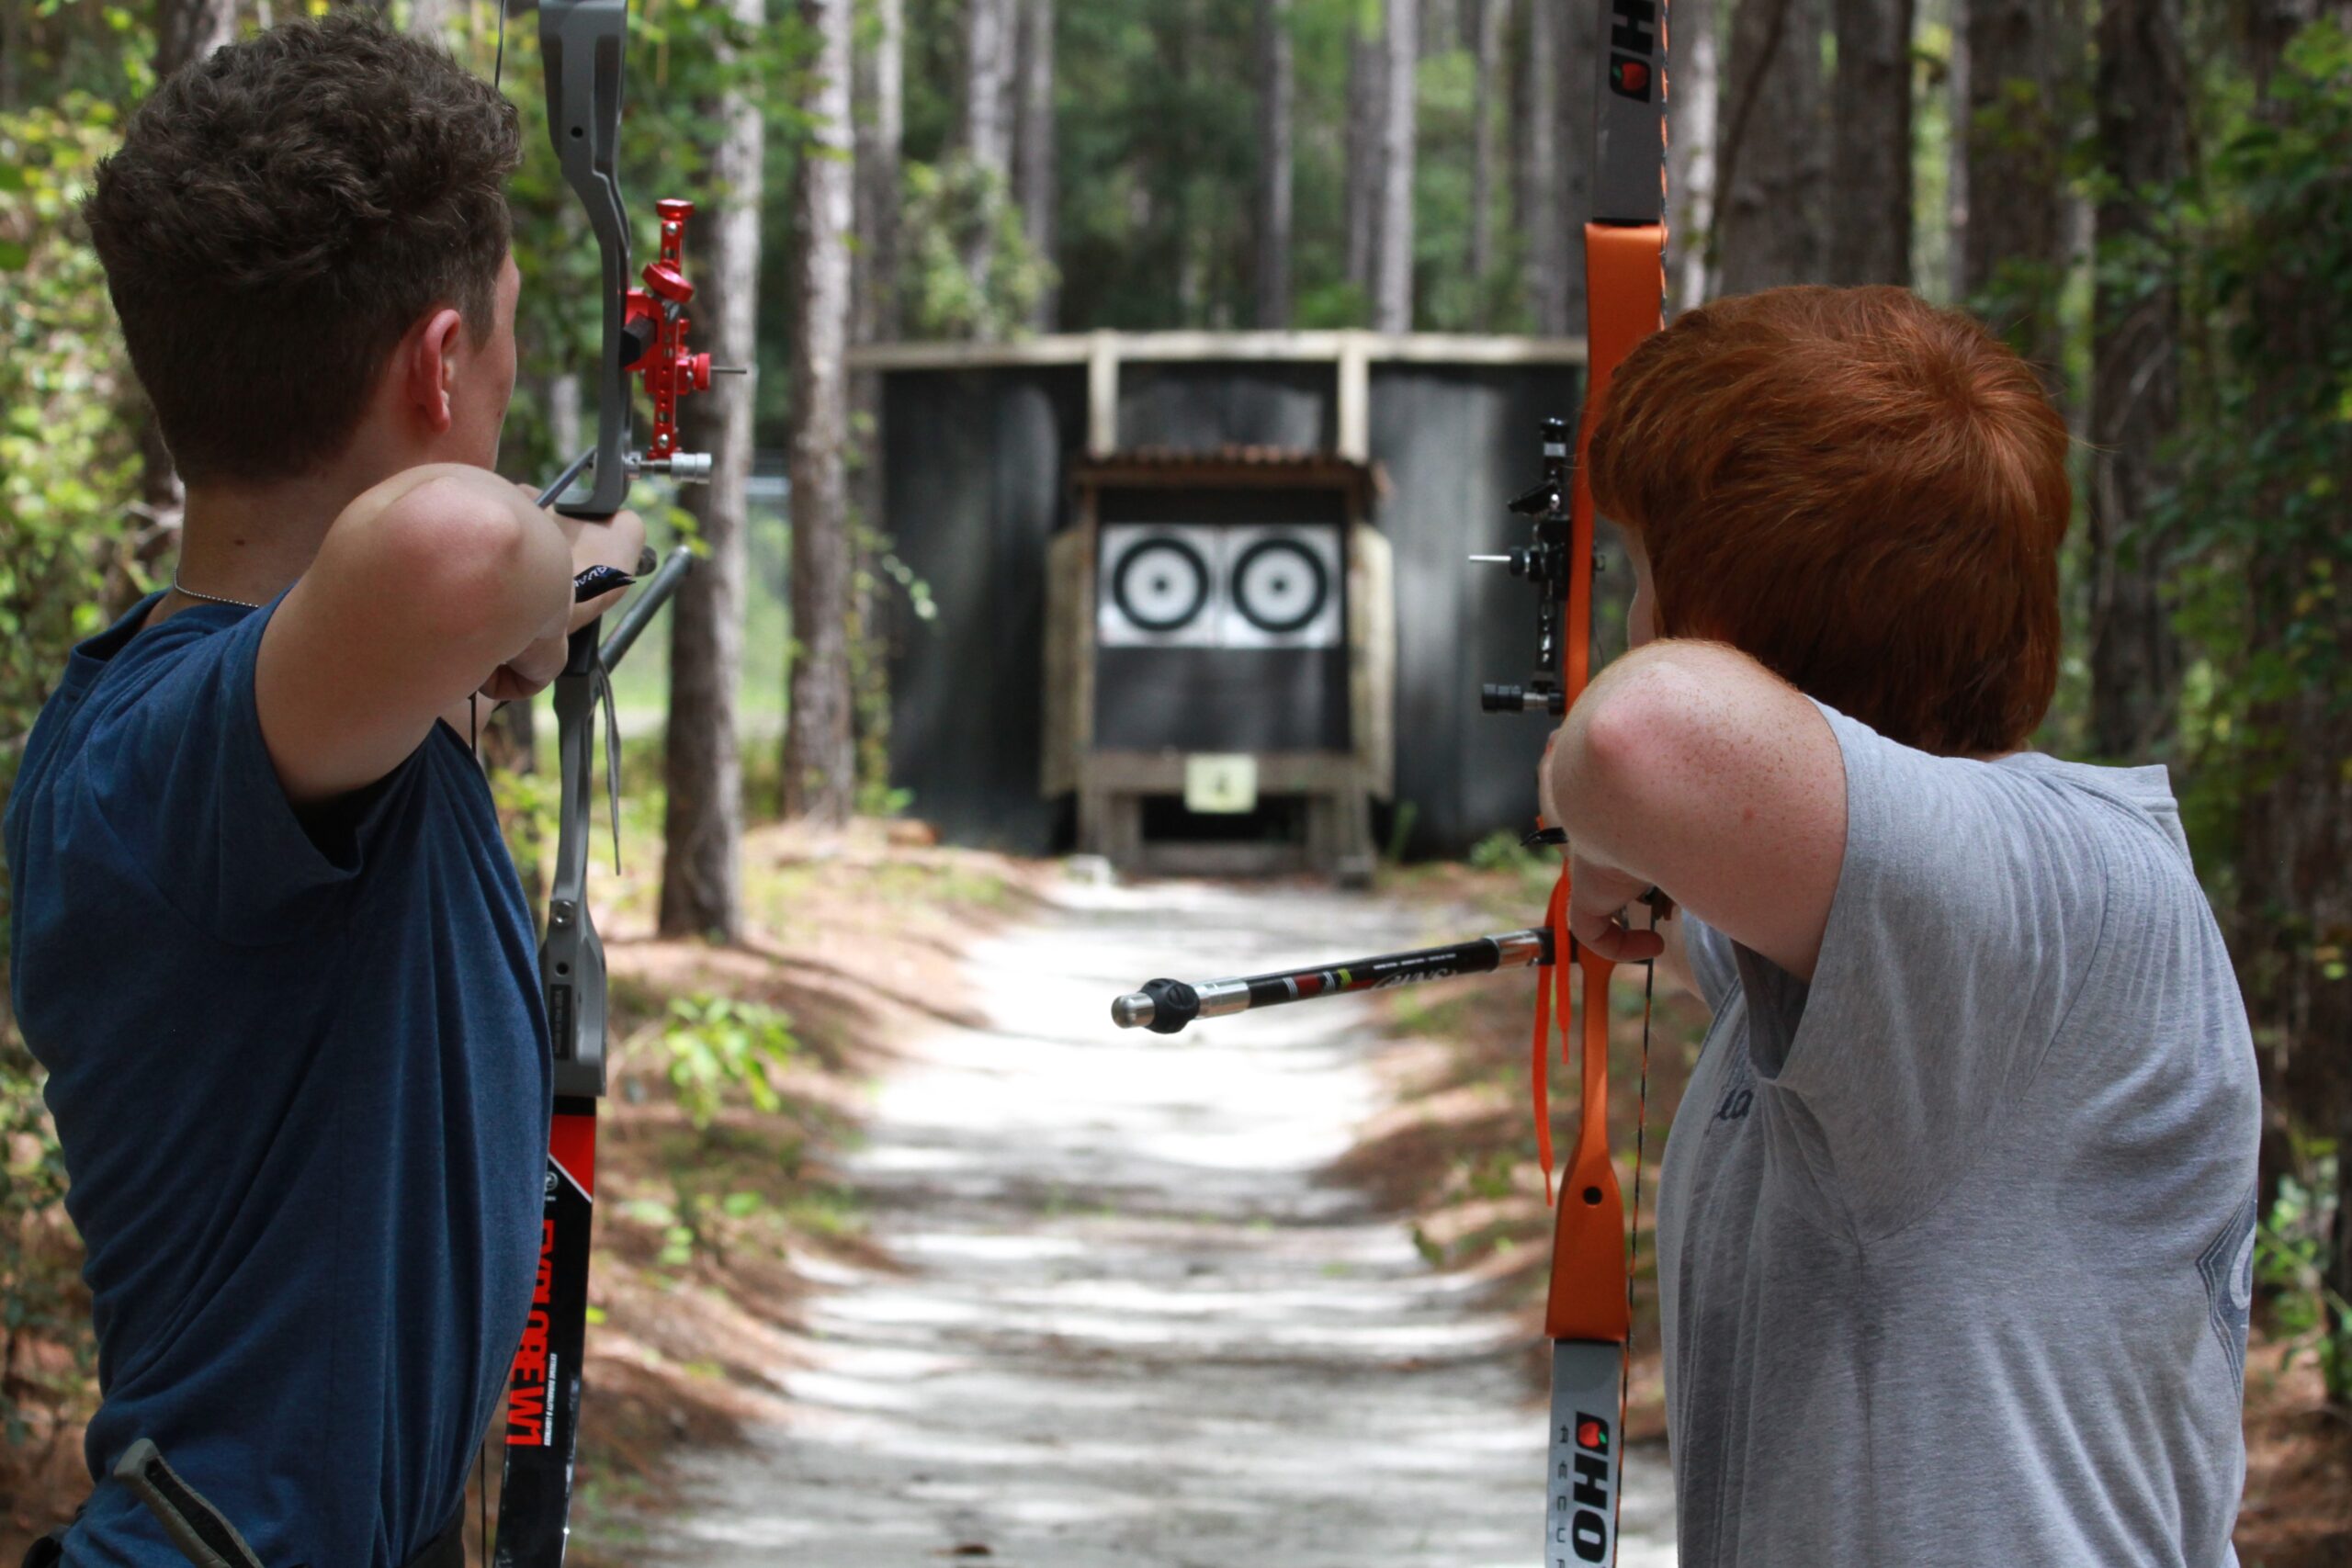 archers taking aim at an outdoor target